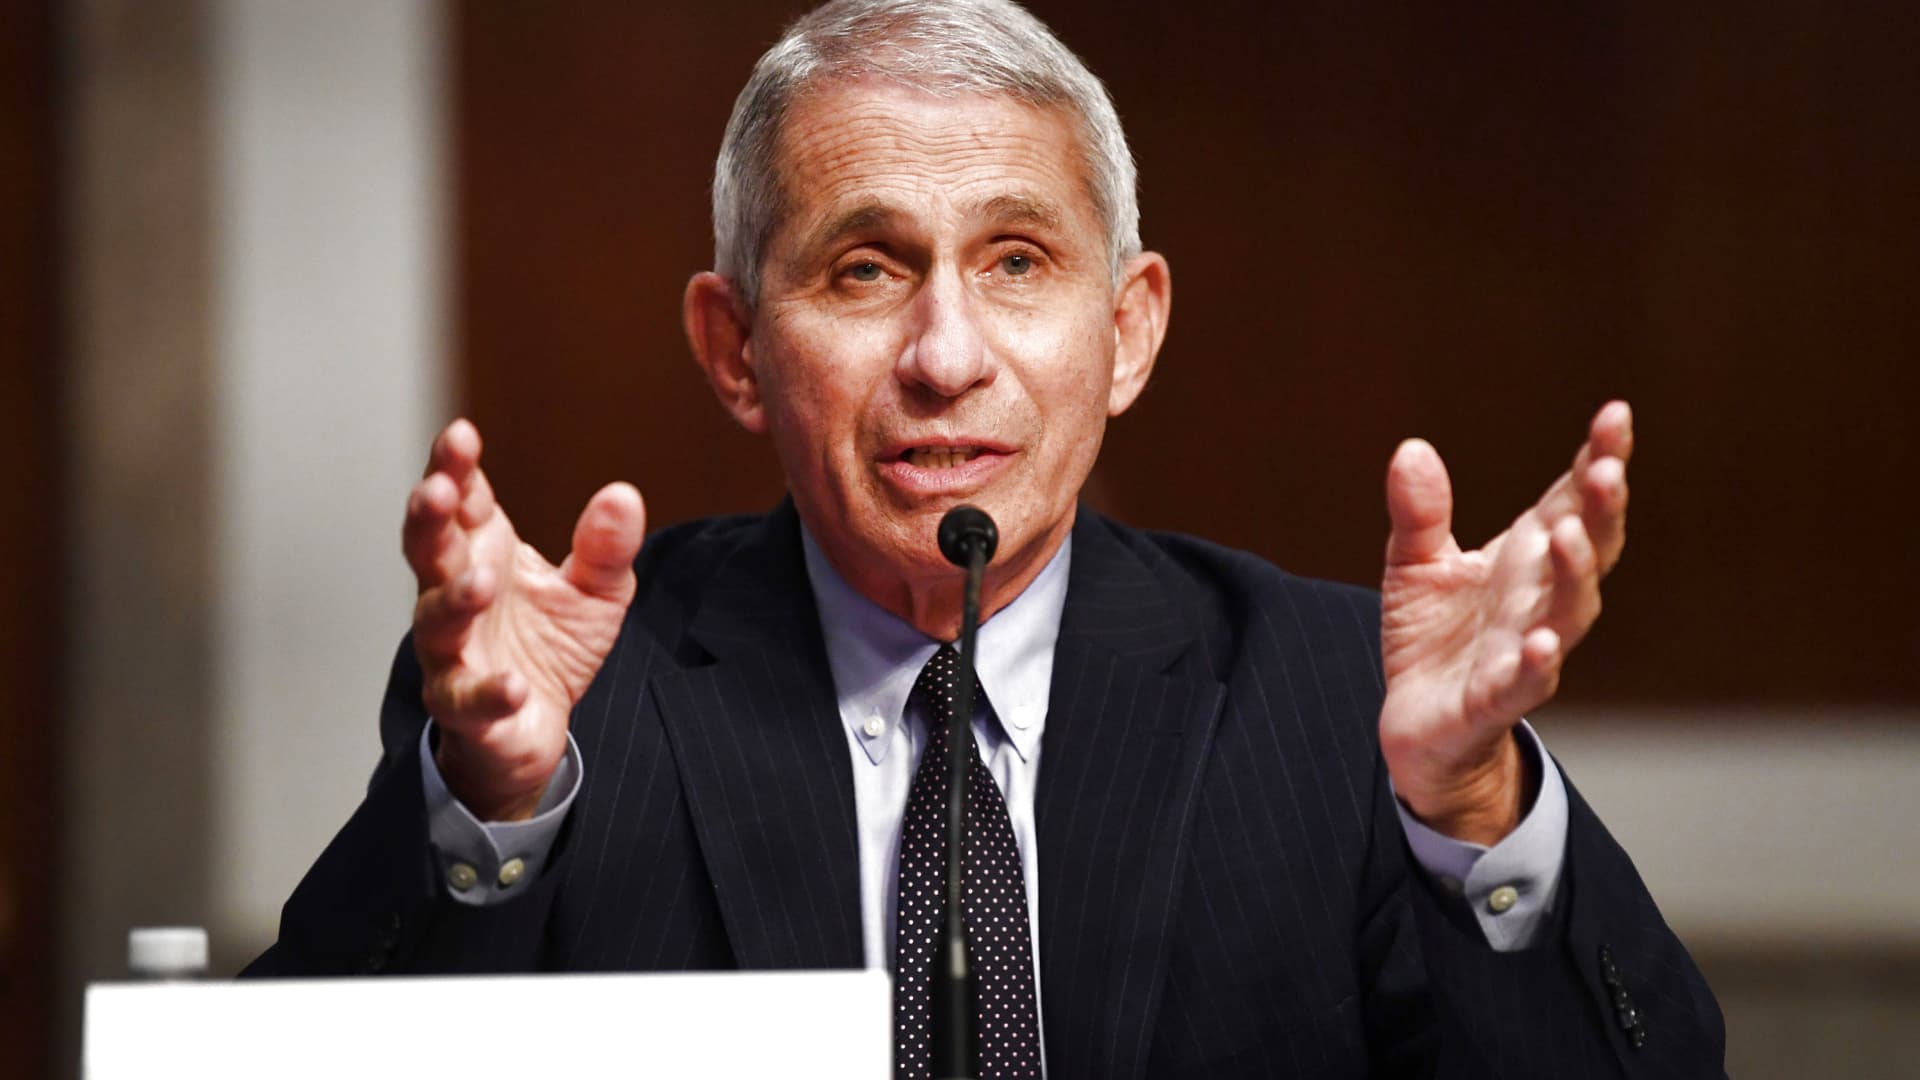 Dr. Anthony Fauci, director of the National Institute for Allergy and Infectious Diseases, testifies before the Senate Health, Education, Labor and Pensions (HELP) Committee hearing on Capitol Hill in Washington DC on June 30, 2020 in Washington, DC.